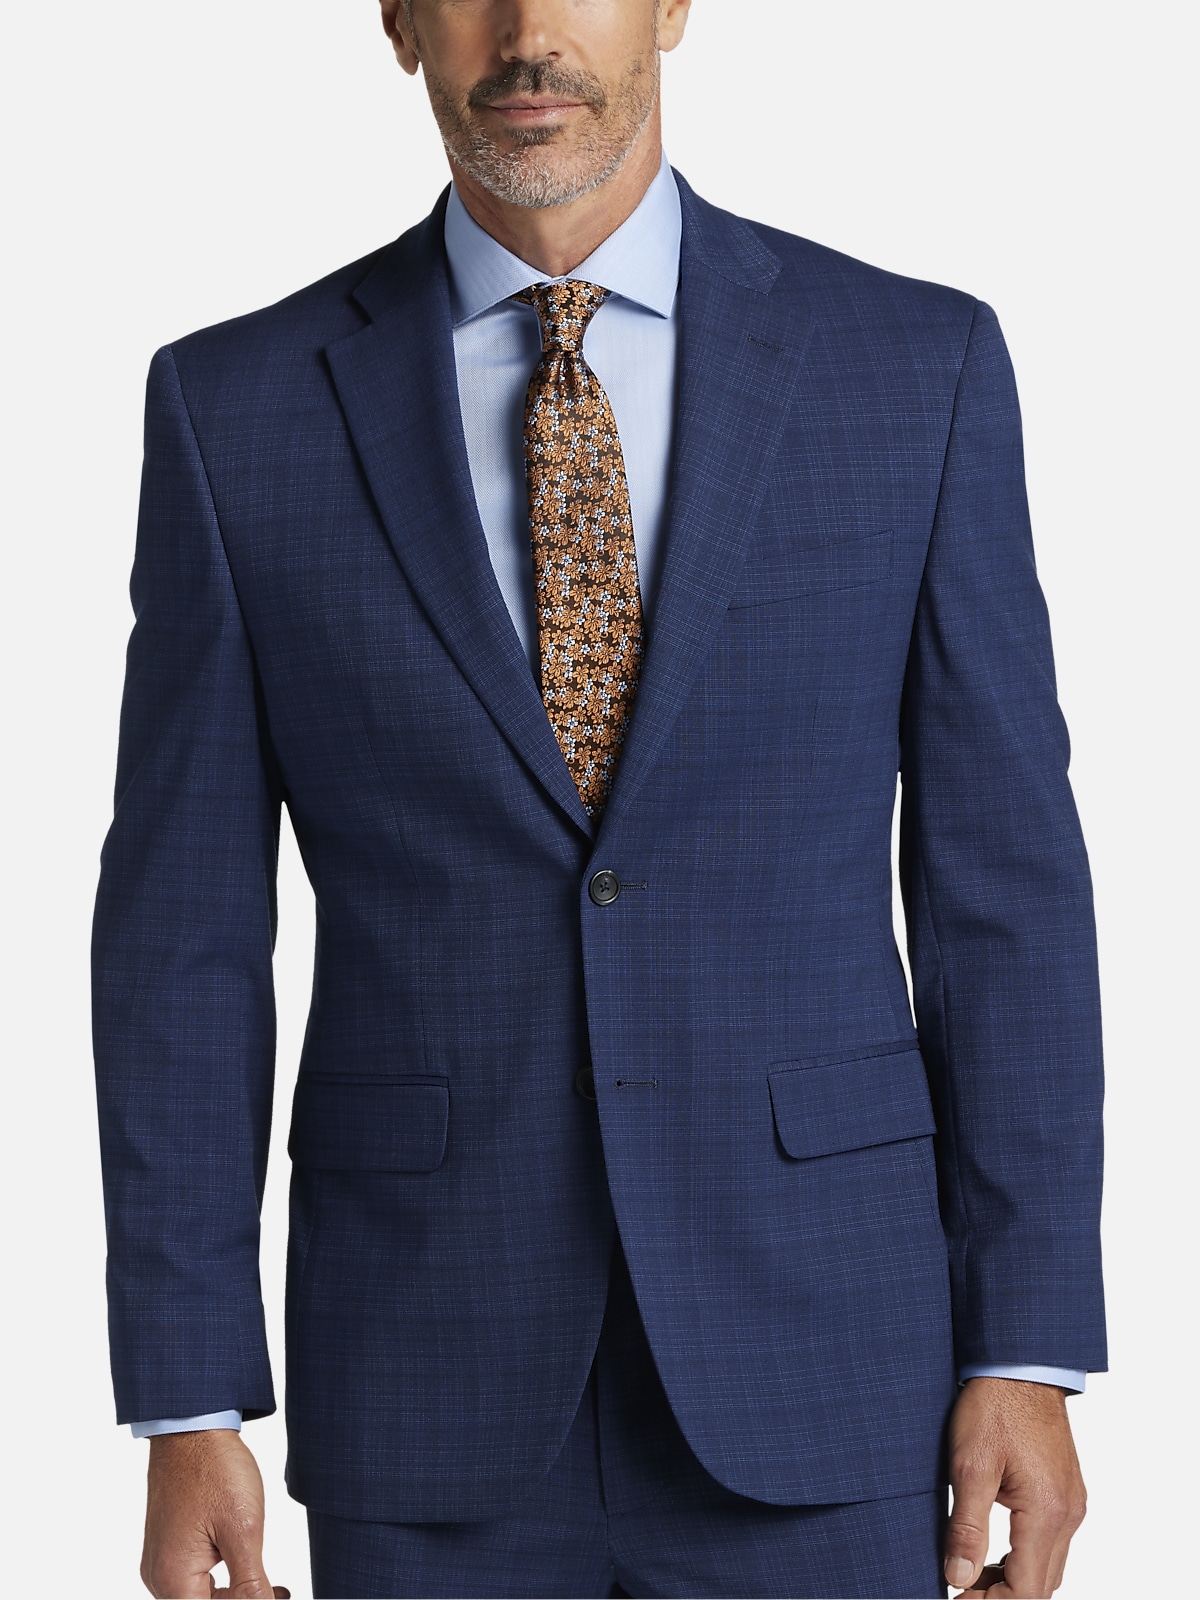 Pronto Uomo Modern Fit Suit Separates Jacket | All Clearance $39.99 ...